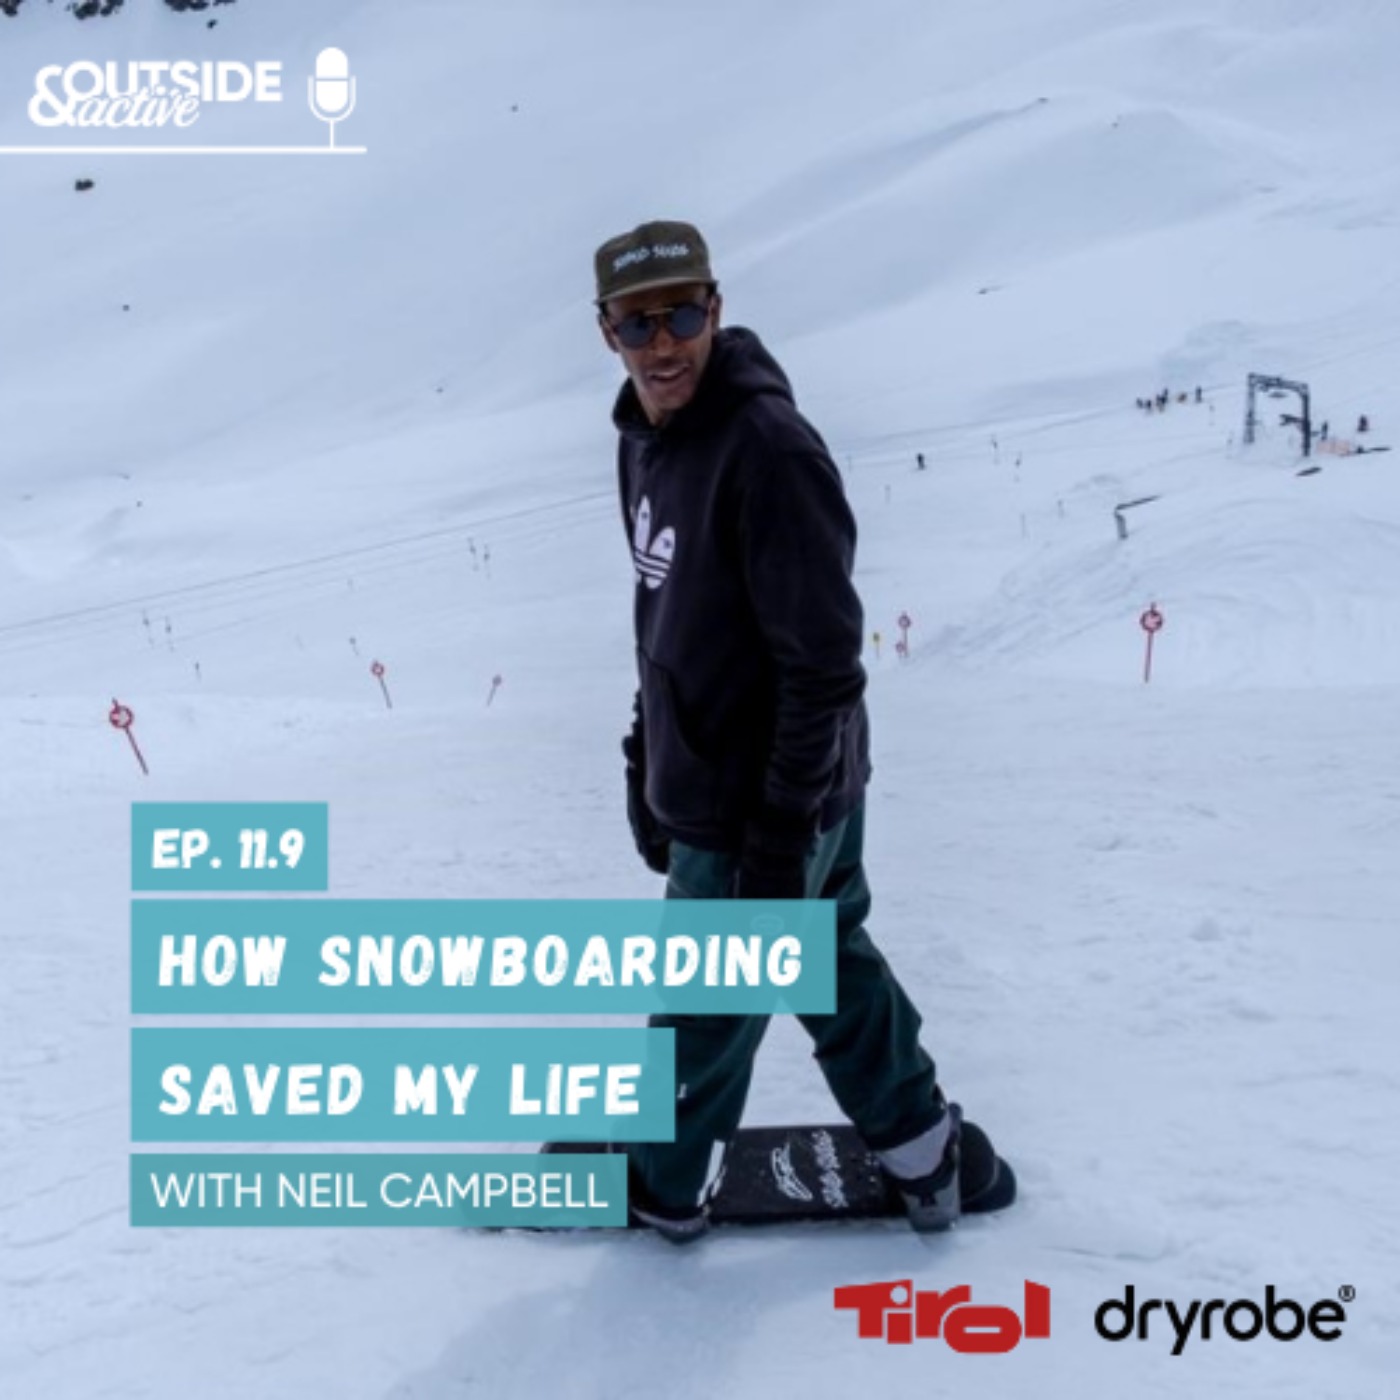 Neil Campbell - How snowboarding saved my life